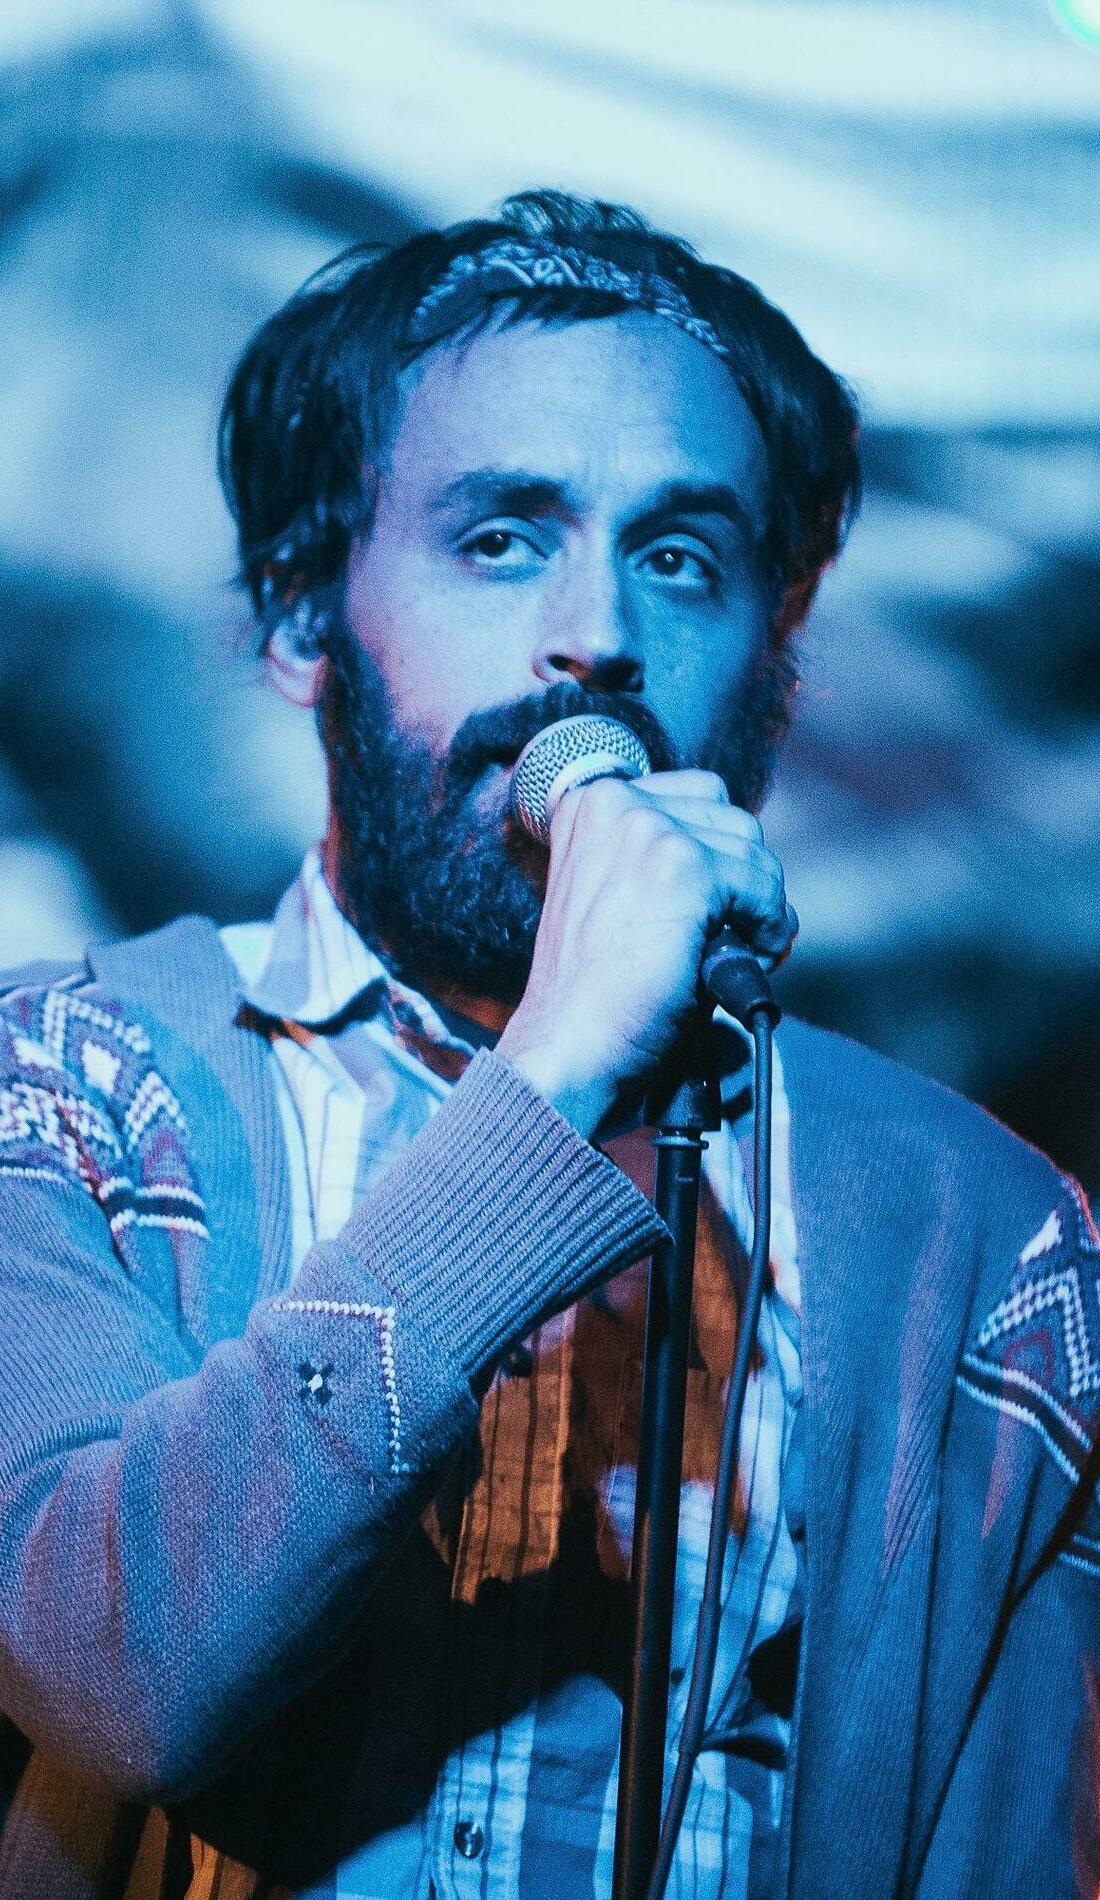 A mewithoutYou live event